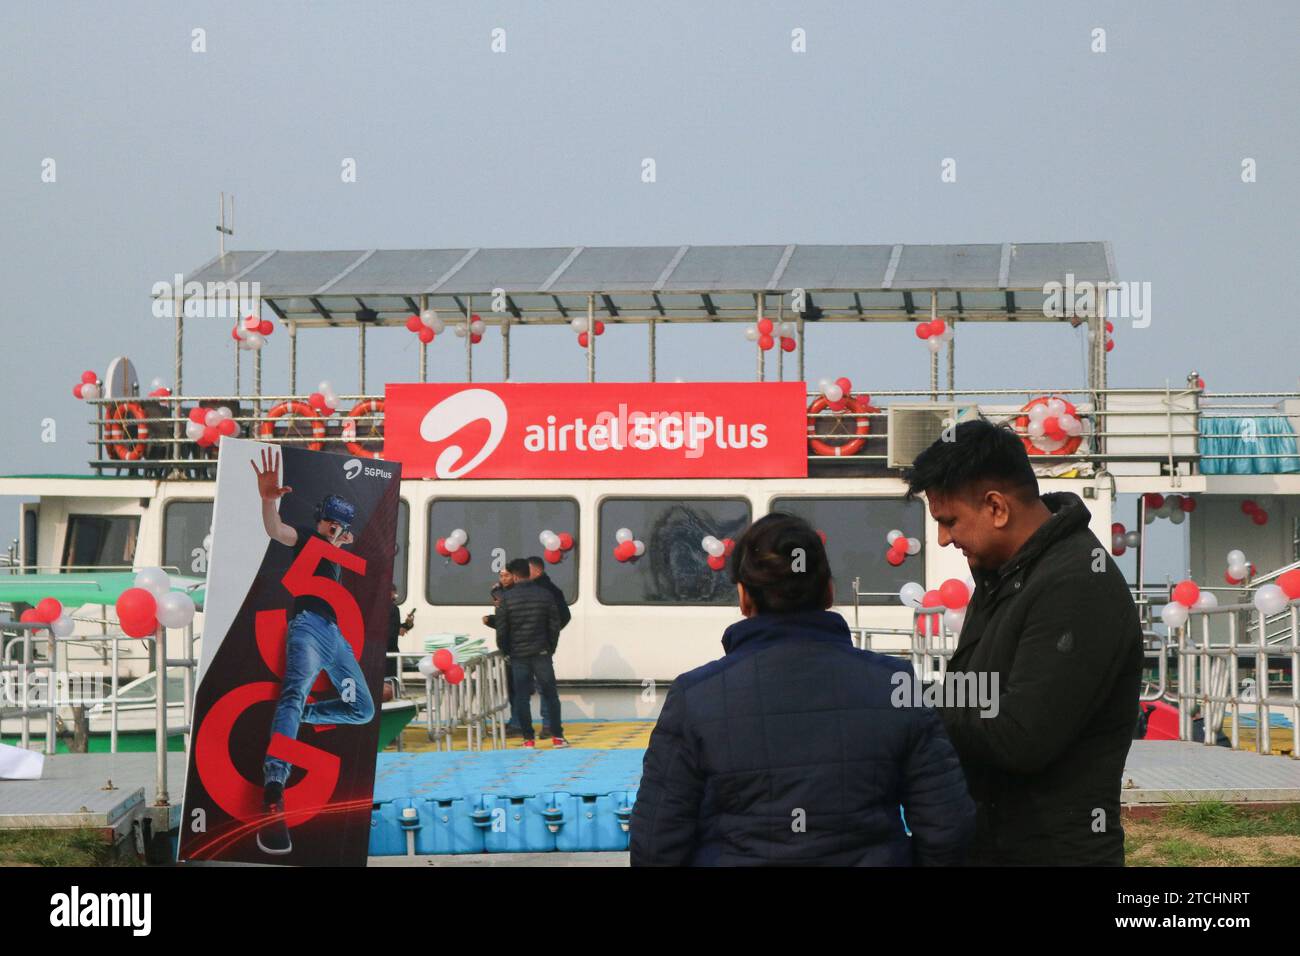 Bharti Airtel Unveils Cutting-Edge 5G Technology December 12,2023, Srinagar Kashmir, India : People stand past logo of Airtel 5G Plus is seen during live 5G plus experience in Srinagar. Airtel announced the launch of its cutting edge 5G services in October, 2022 in 8 cities in India. Today, Airtel s services are live across all states and union territories of India with over 50 million customers as on October 1st, 2023. Srinagar Kashmir India Copyright: xFirdousxNazirxxEyepixxGroupx Stock Photo